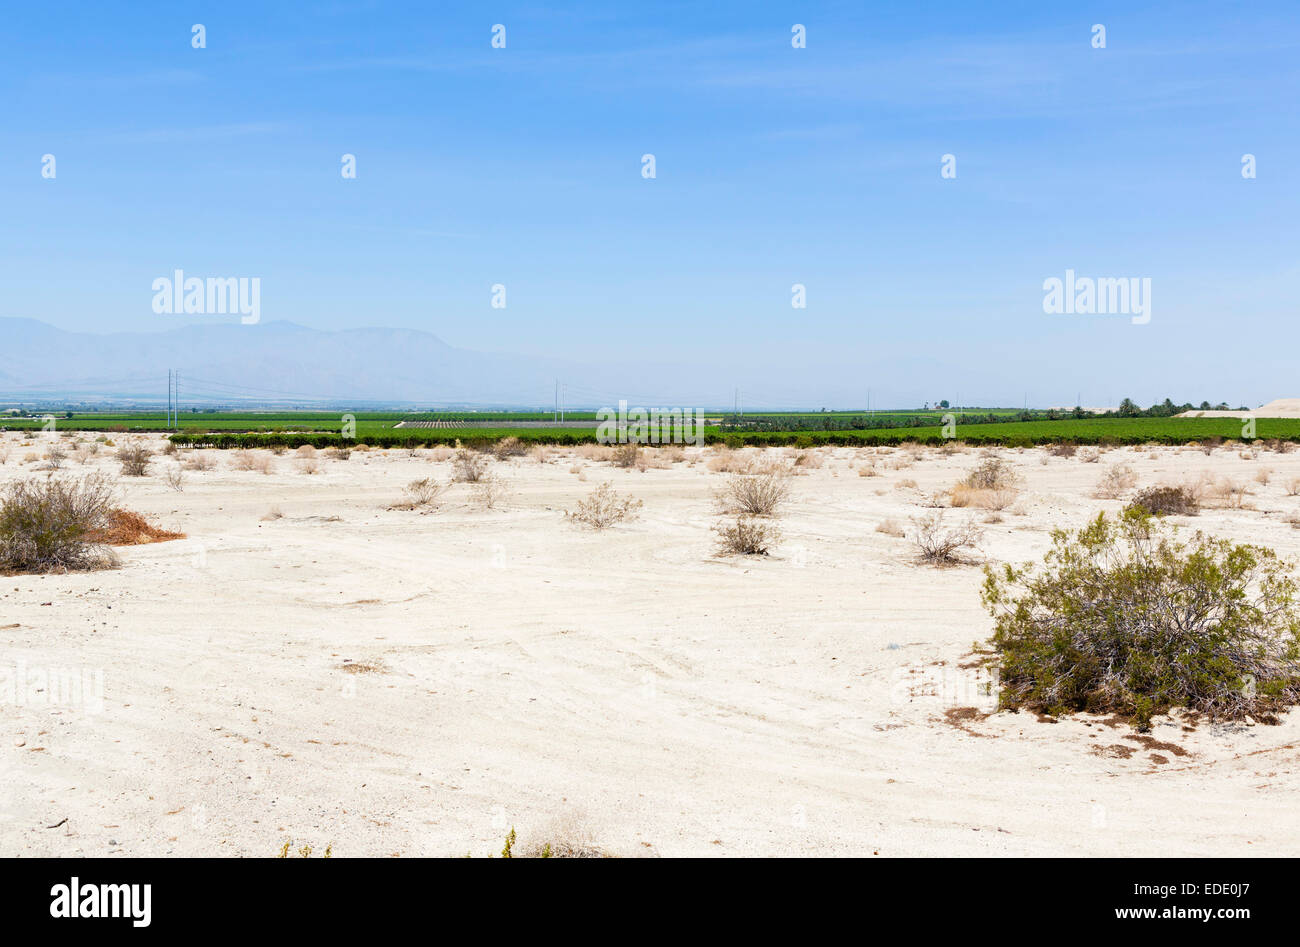 Contrast between the dry desert and the irrigated farmland of the Imperial Valley, Imperial County, California, USA Stock Photo